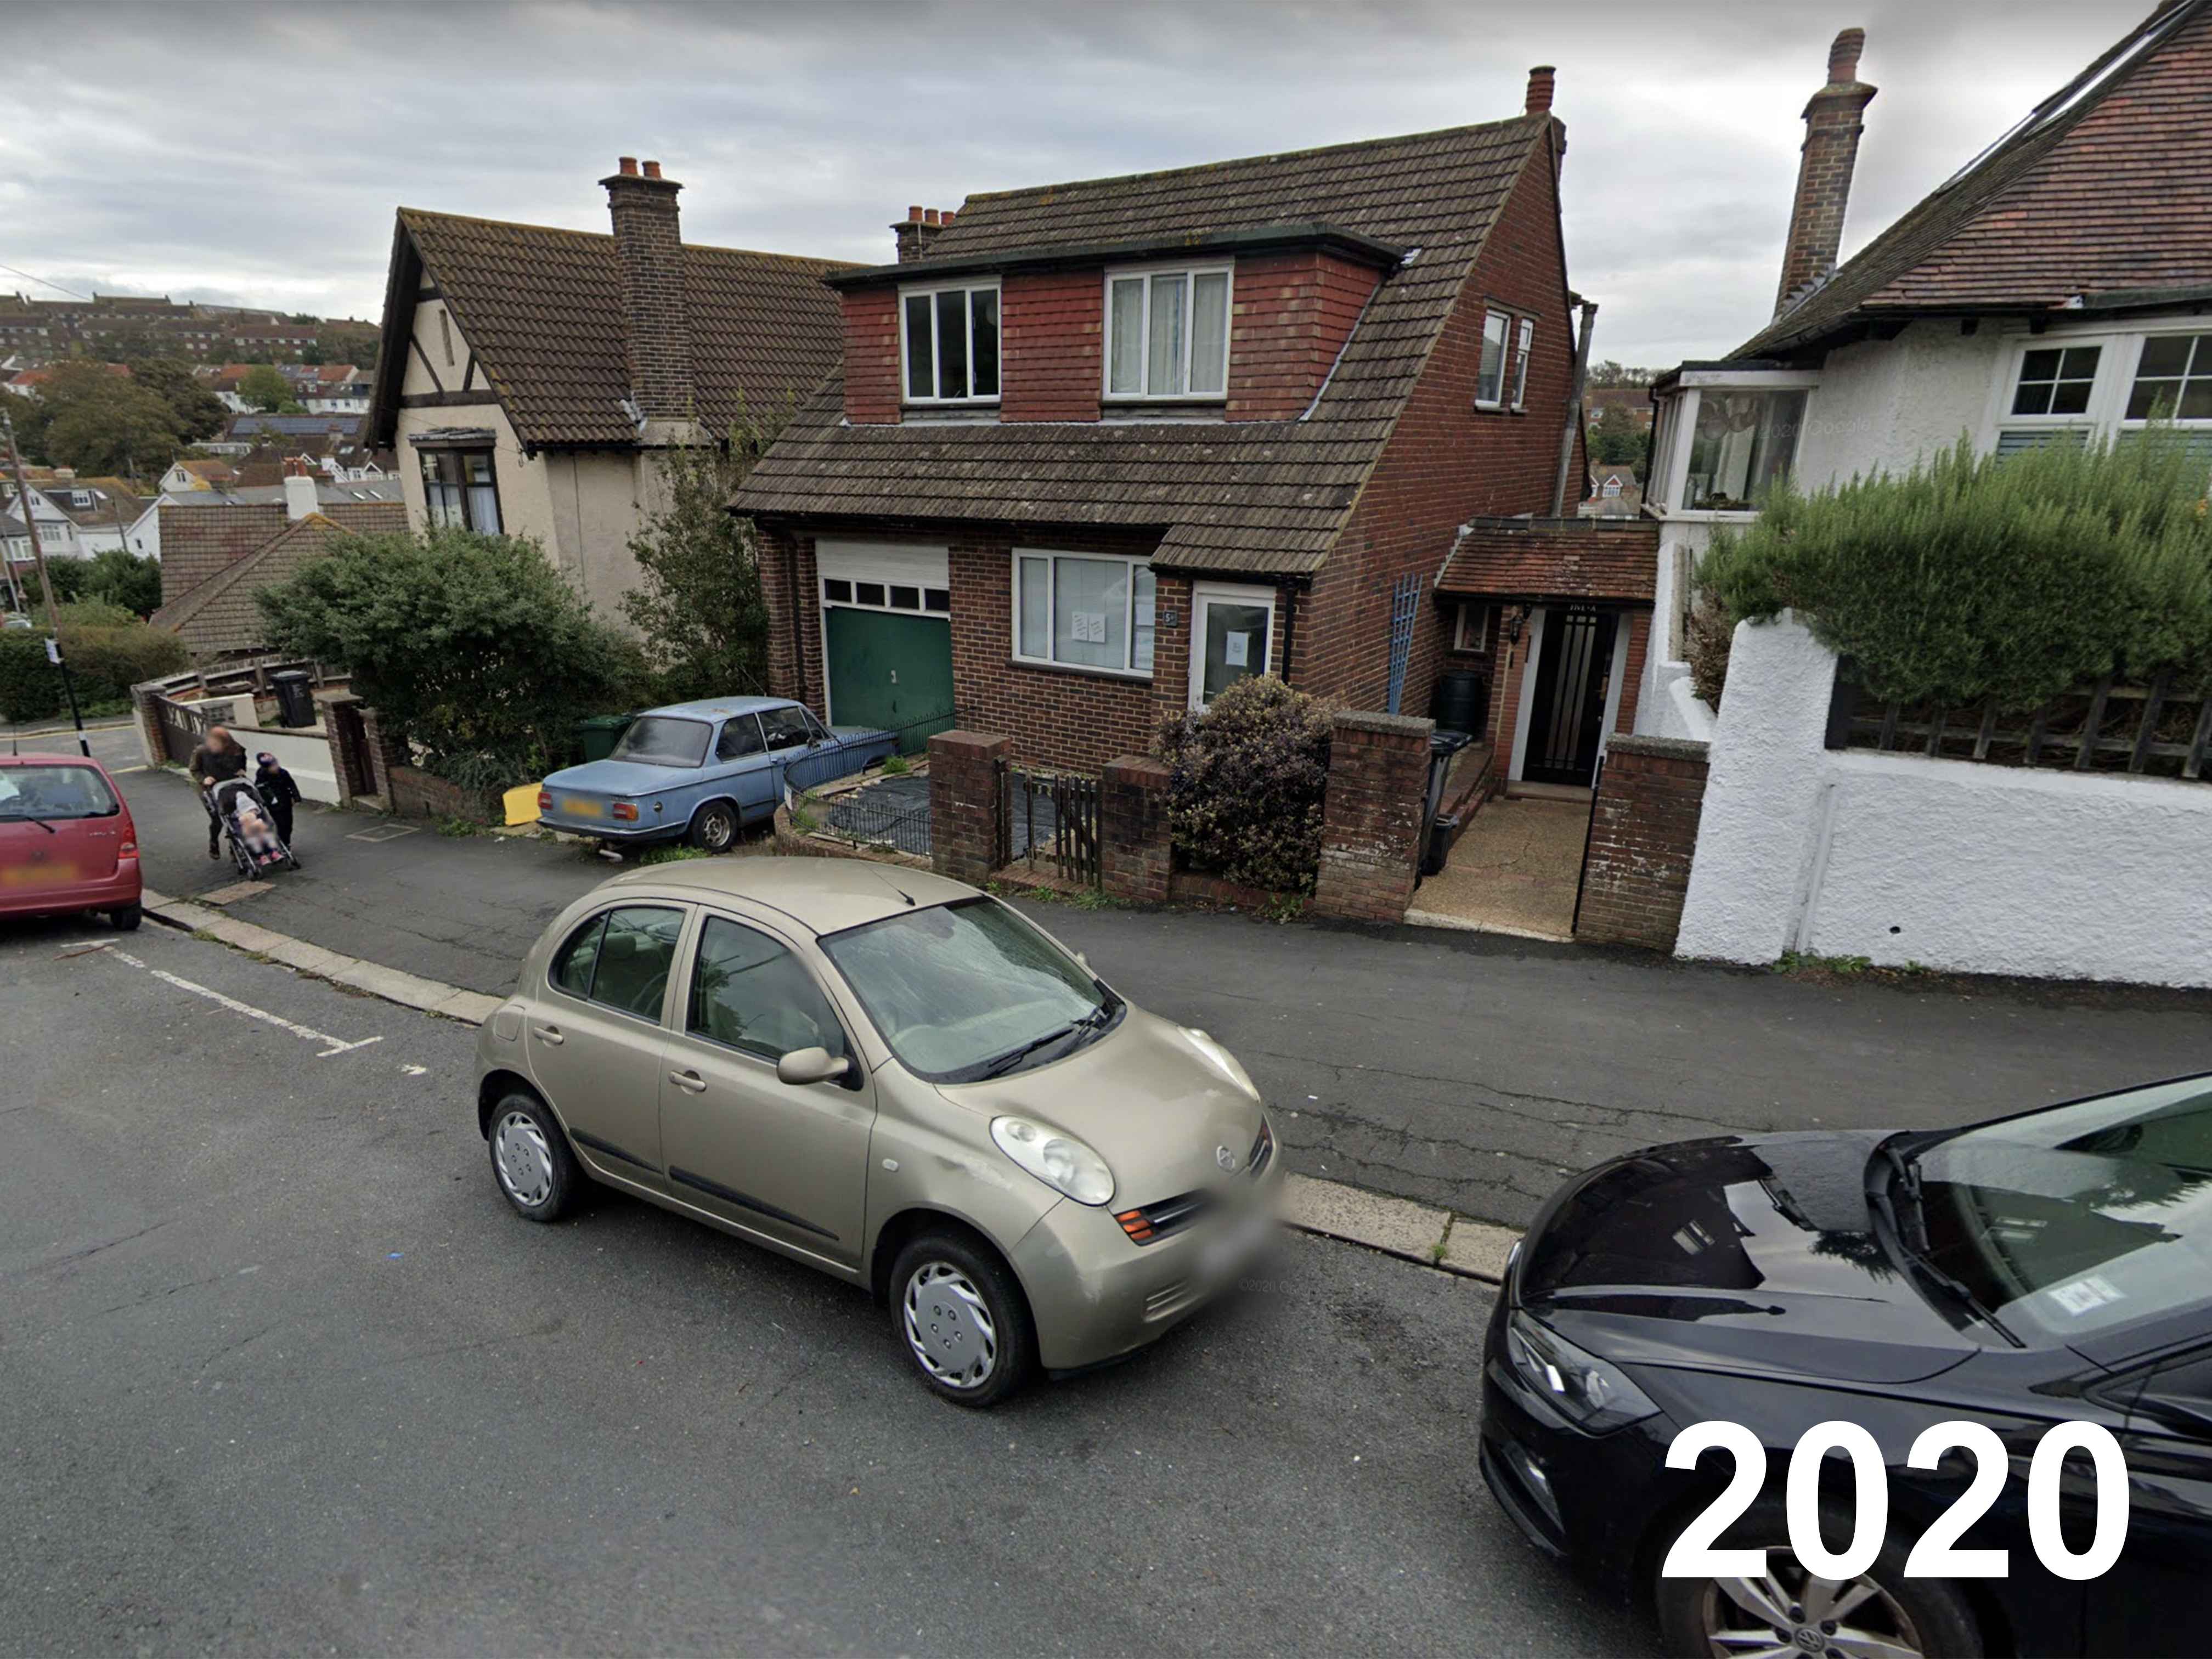 Photograph of LC03 FYJ - a Gold Nissan Micra parked in Hollingdean by a non-resident, and potentially abandoned. The fourteenth of seventeen photographs supplied by the residents of Hollingdean.